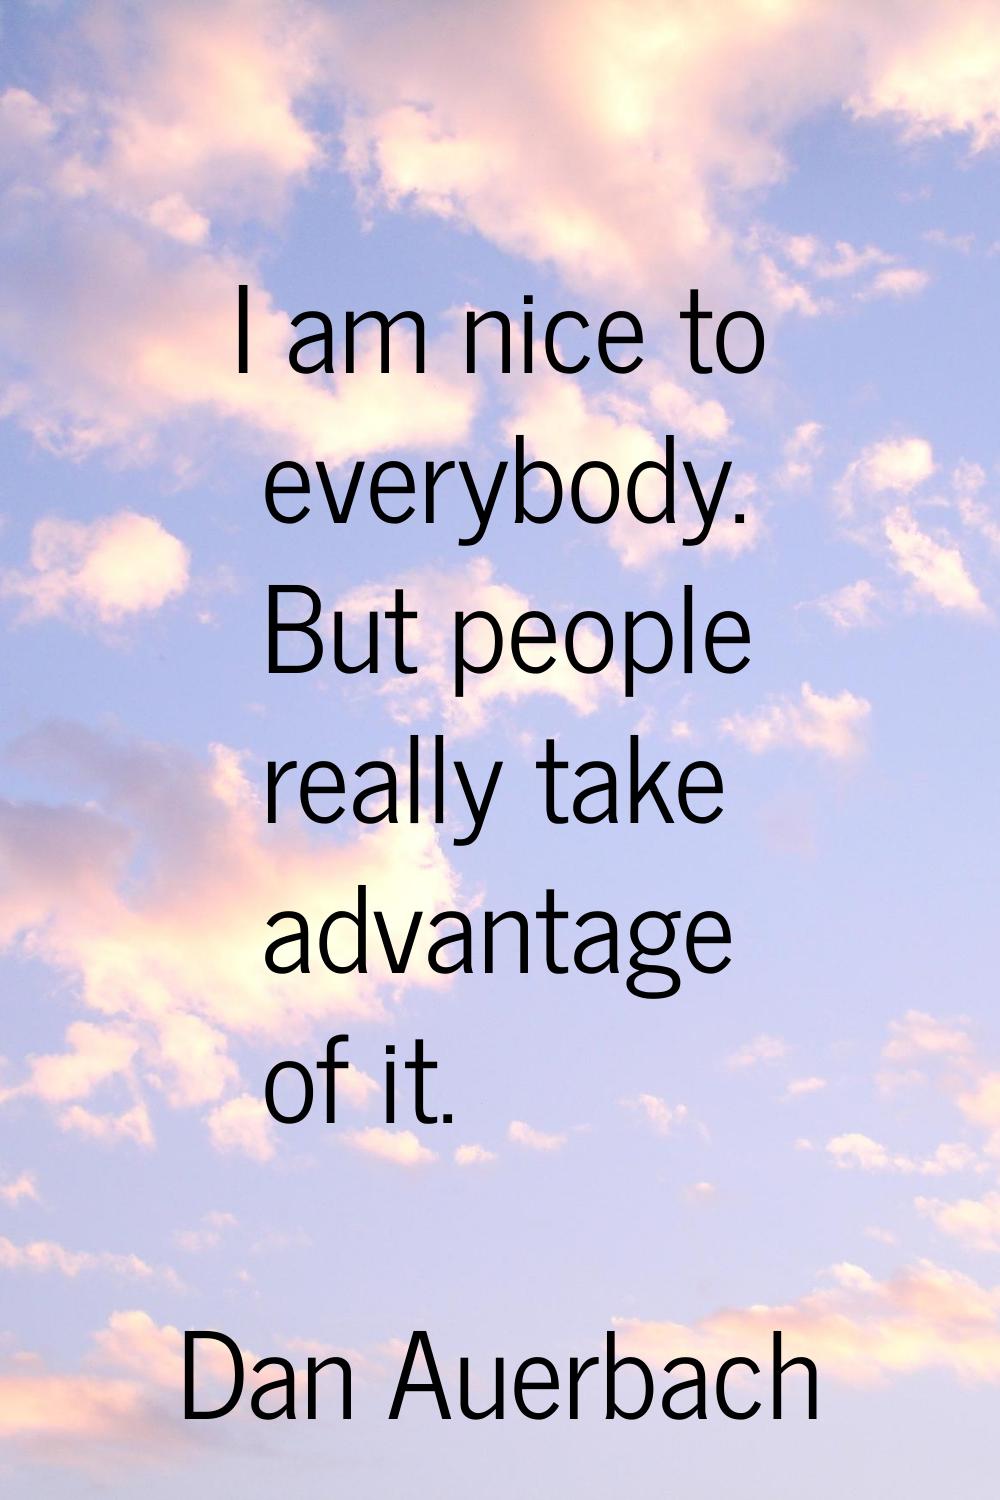 I am nice to everybody. But people really take advantage of it.